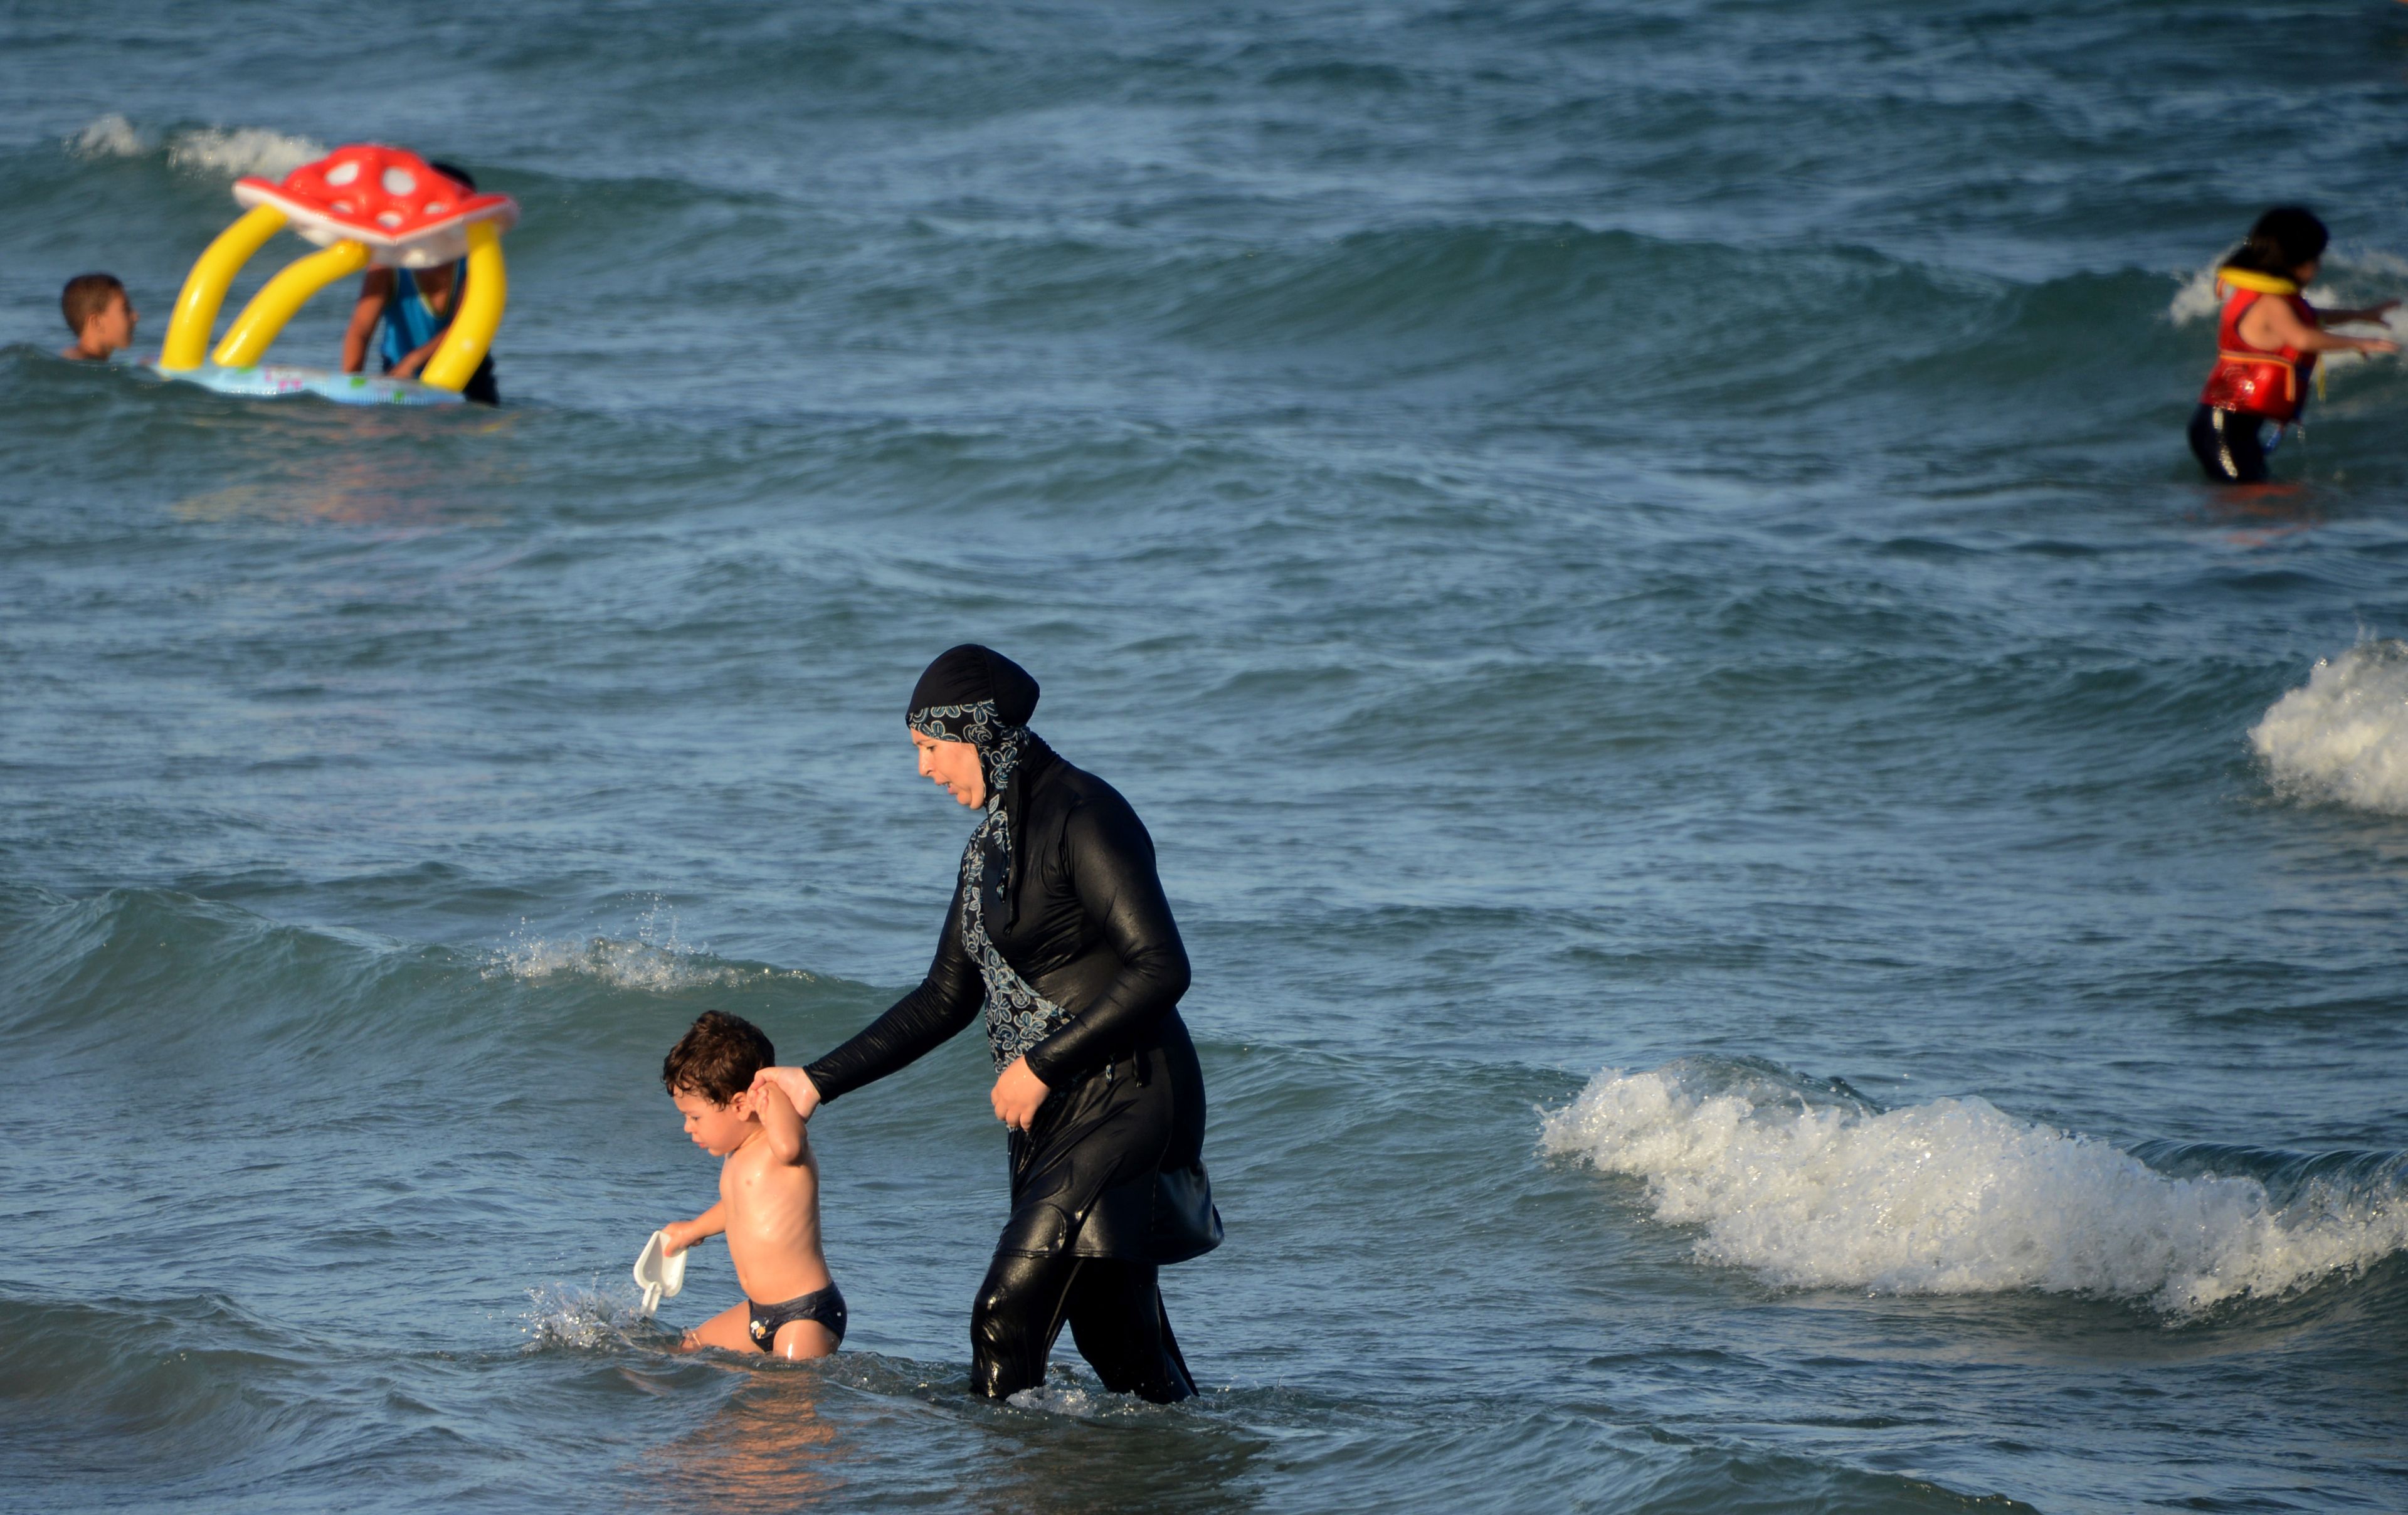 A Tunisian woman wearing a burkini, a full-body swimsuit designed for Muslim women on Aug. 16, 2016, at a beach northeast of Tunis (Fethi Belaid—AFP/Getty Images)